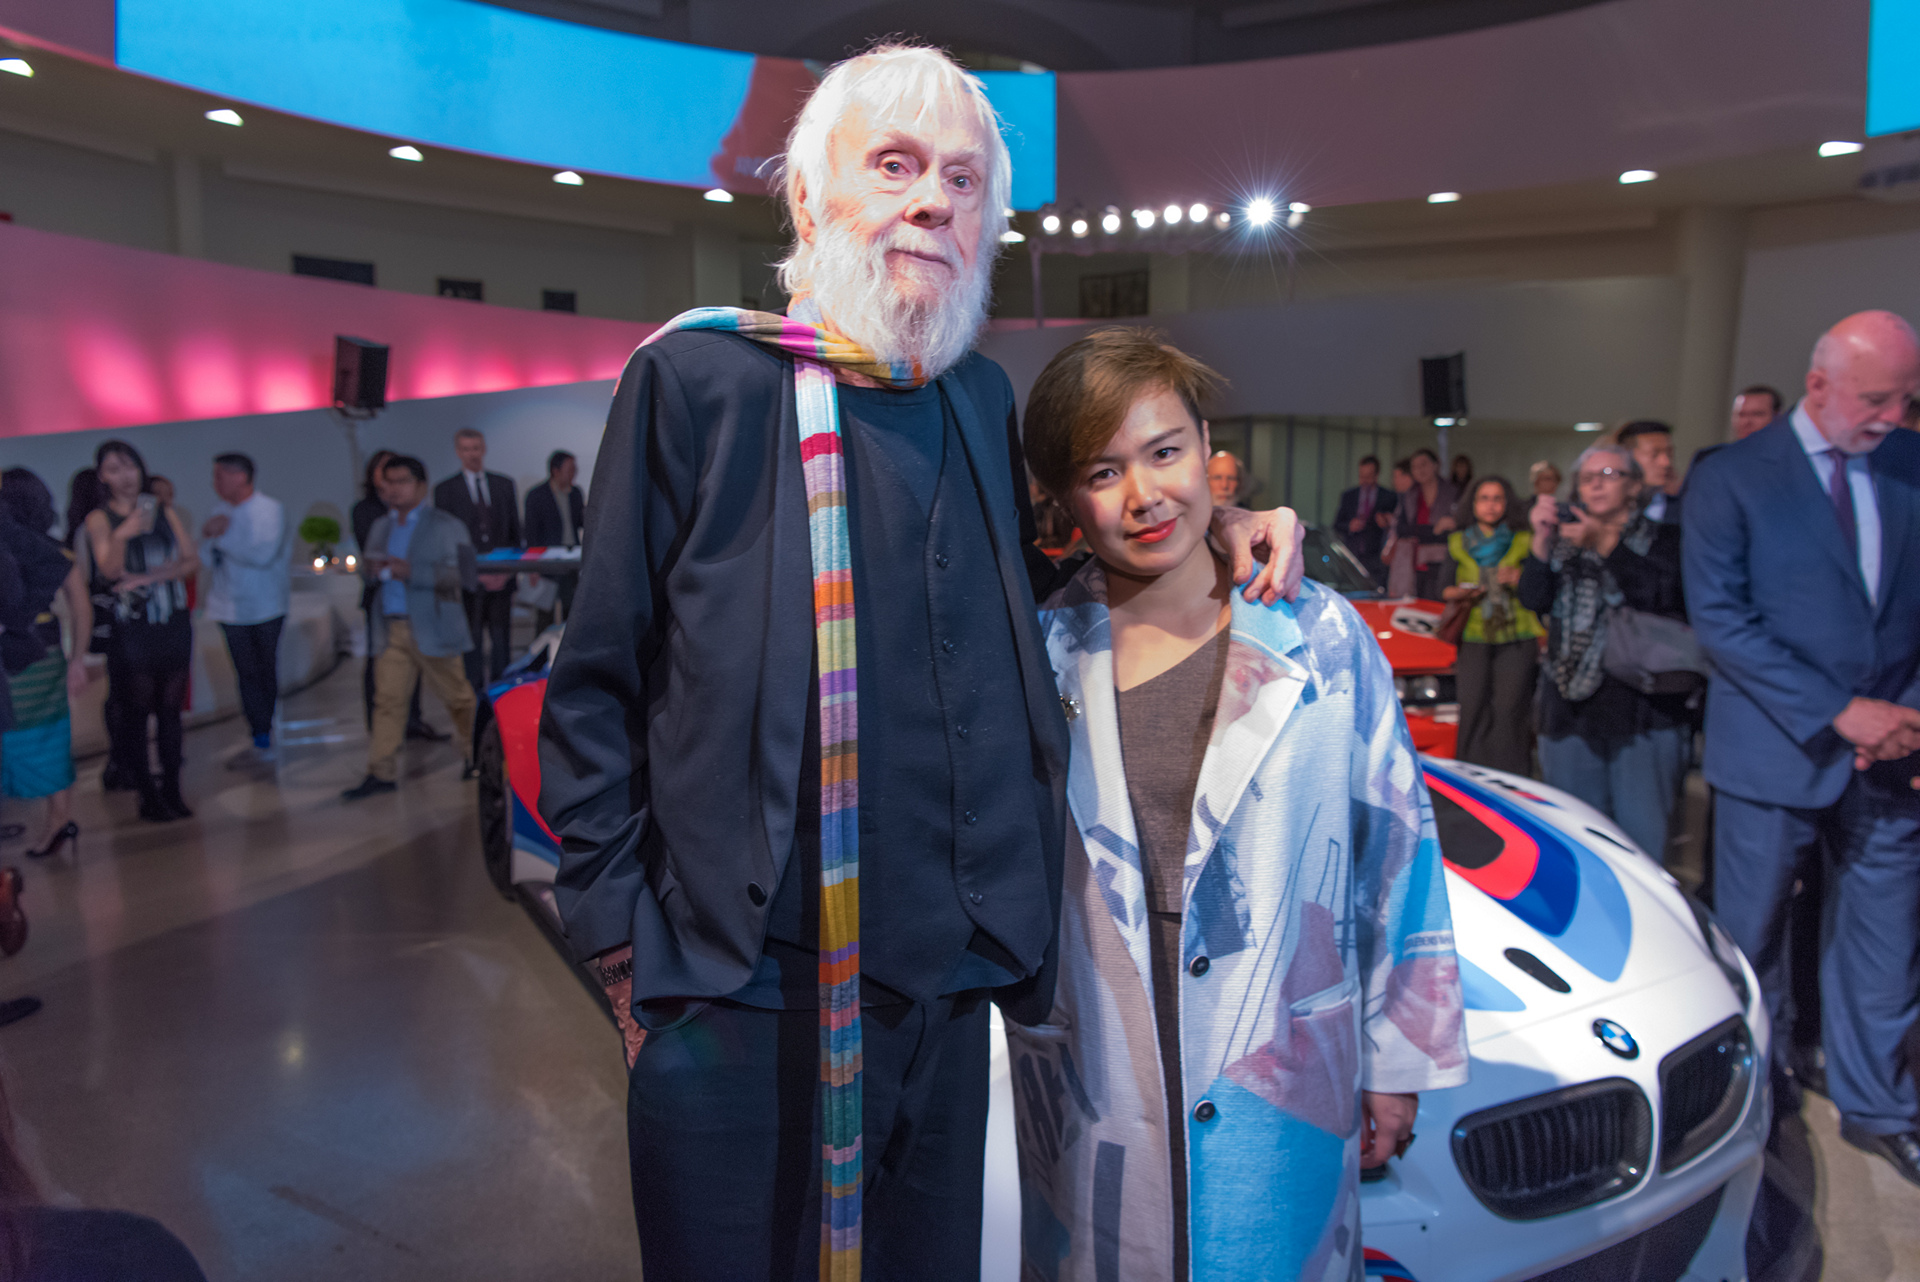 John Baldessari and Cao Fei, the new BMW Art Car artists, at the announcement event at the Guggenheim Museum © BMW AG